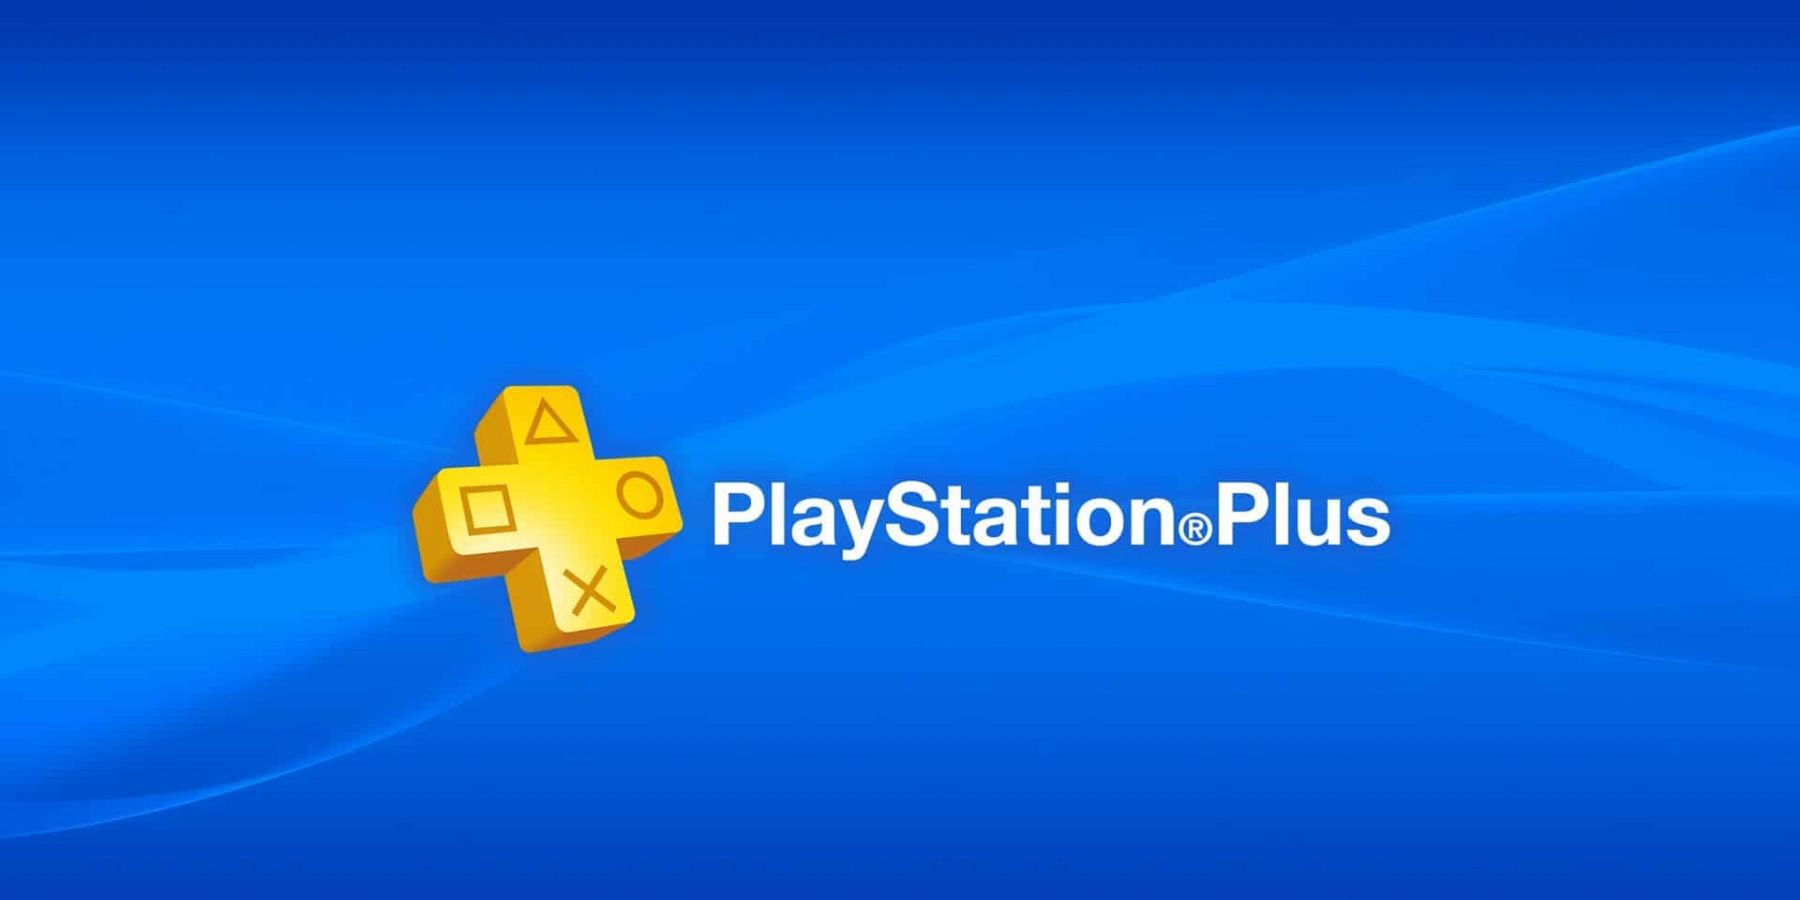 PS Plus Is Still on Sale for Cyber Monday, But The Deal Ends Today